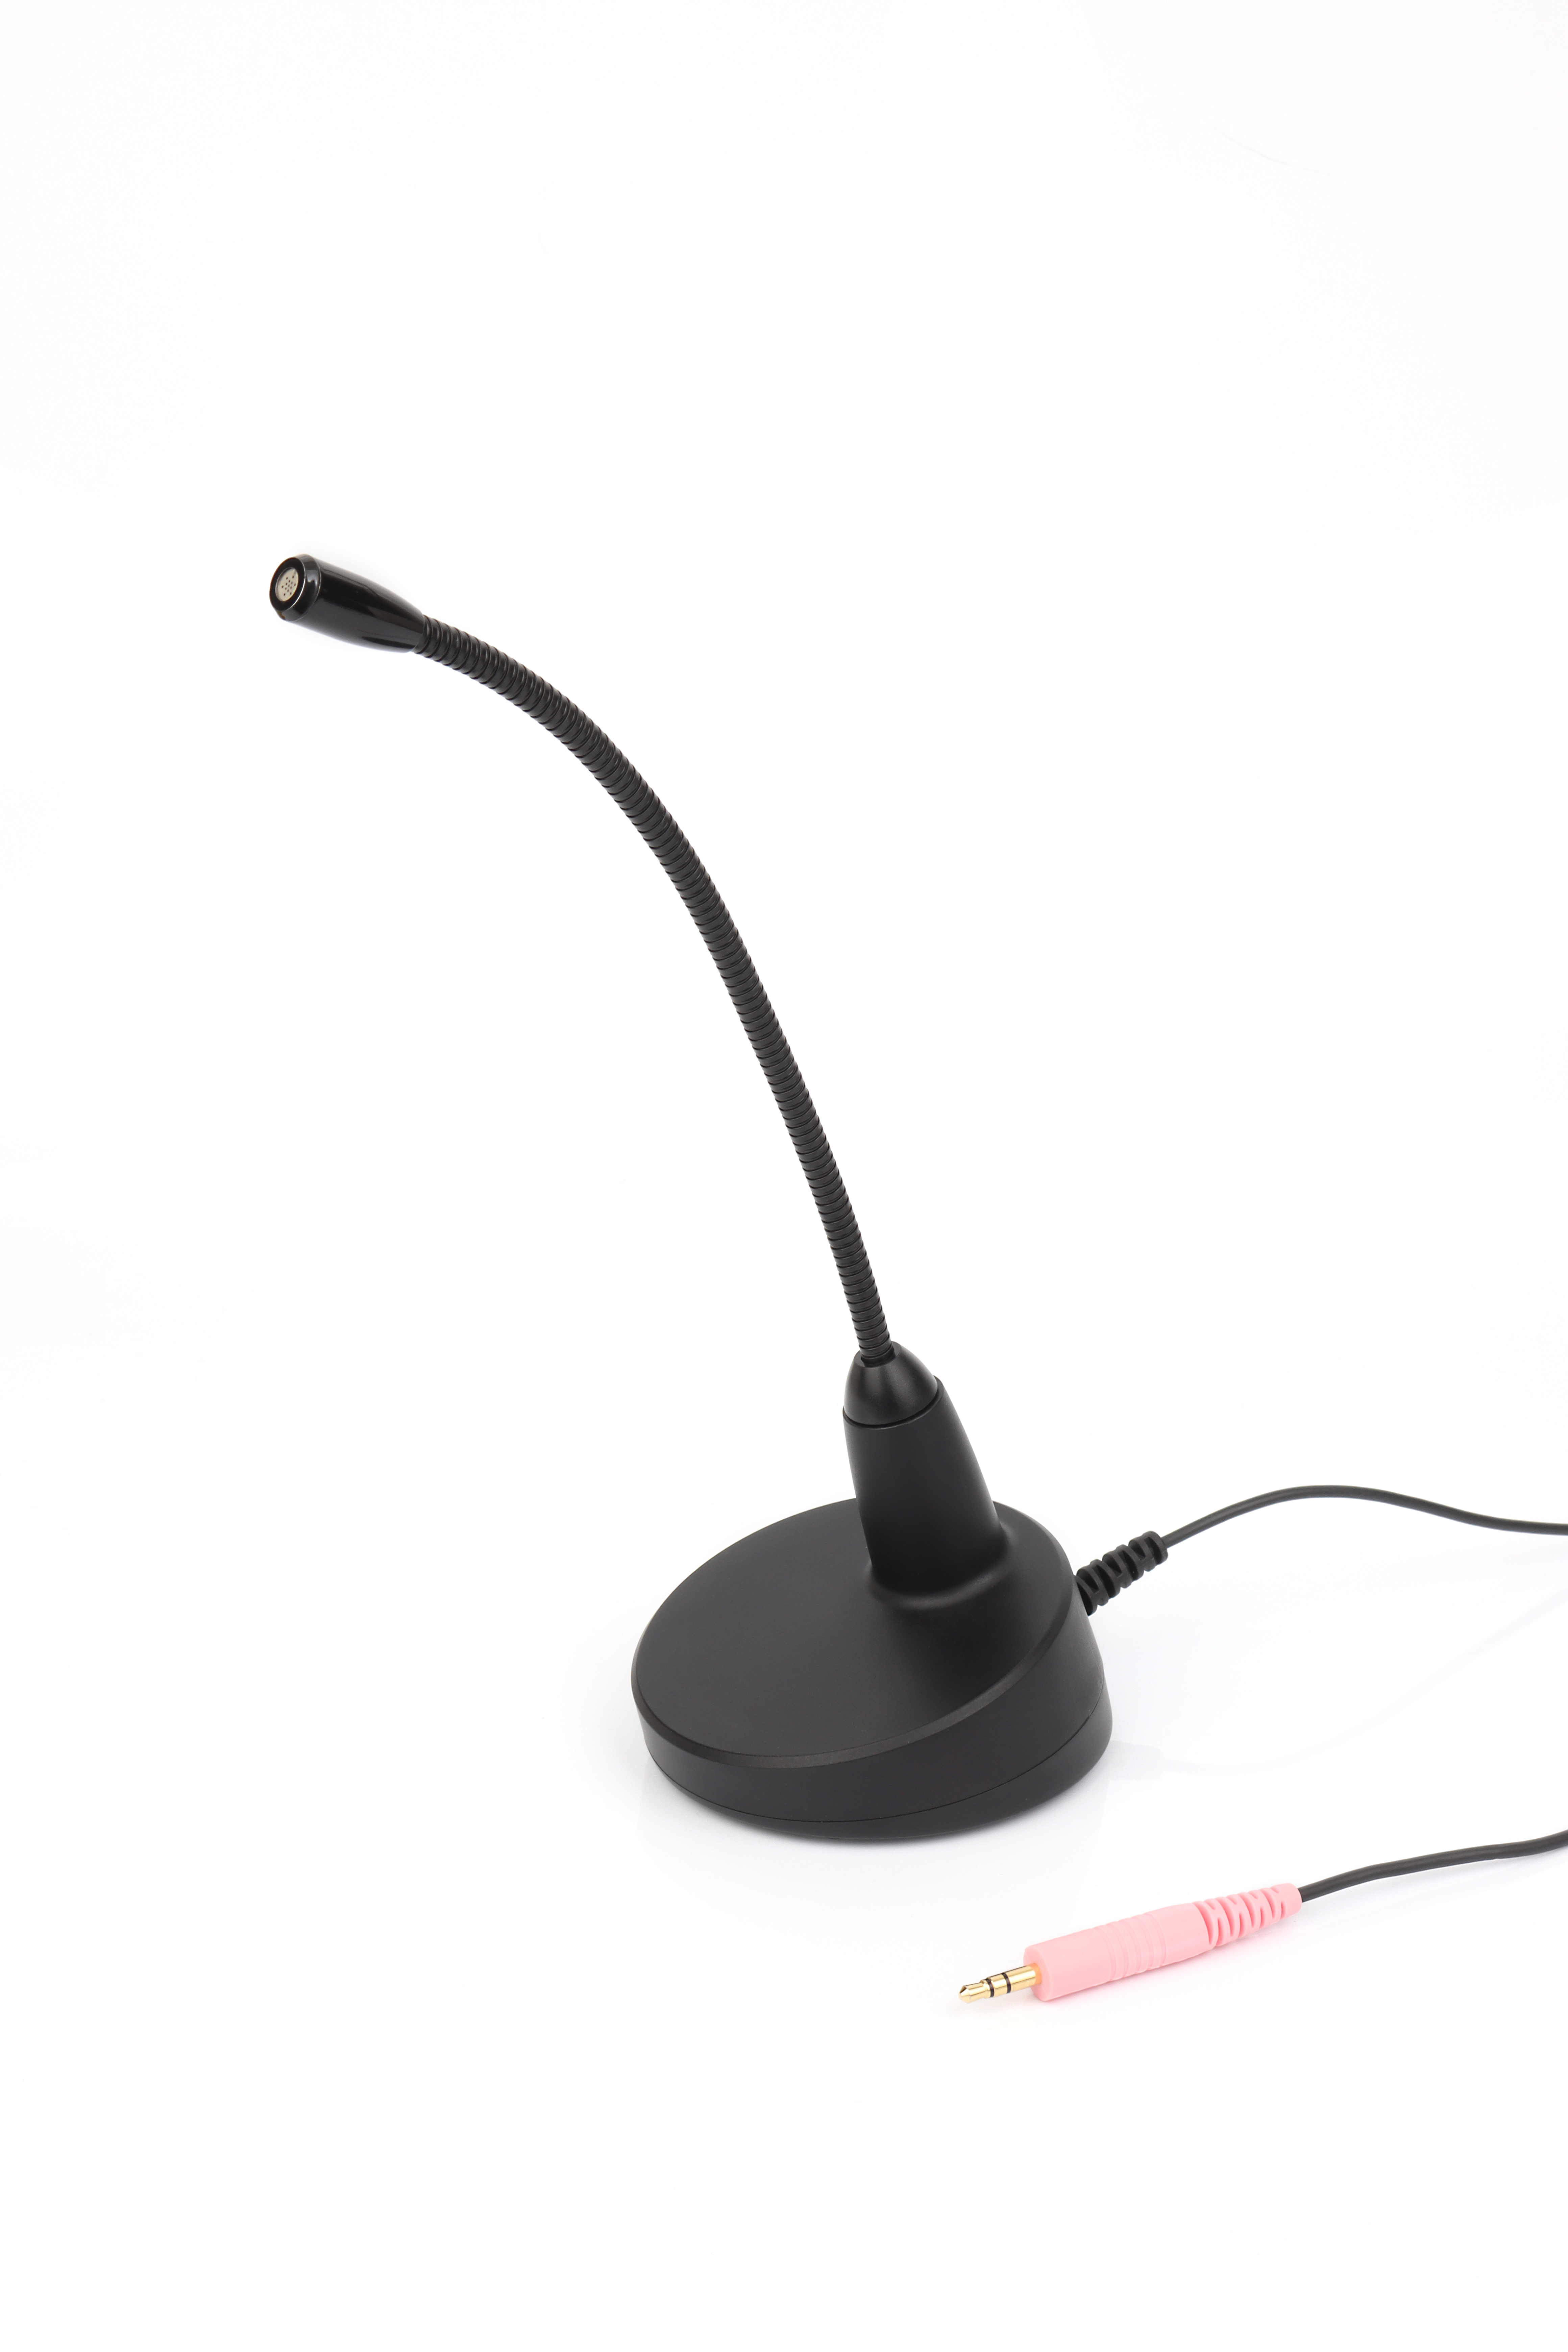 Live speech microphone for audiometry - ultra low noise - ultra linear - high reproduceability